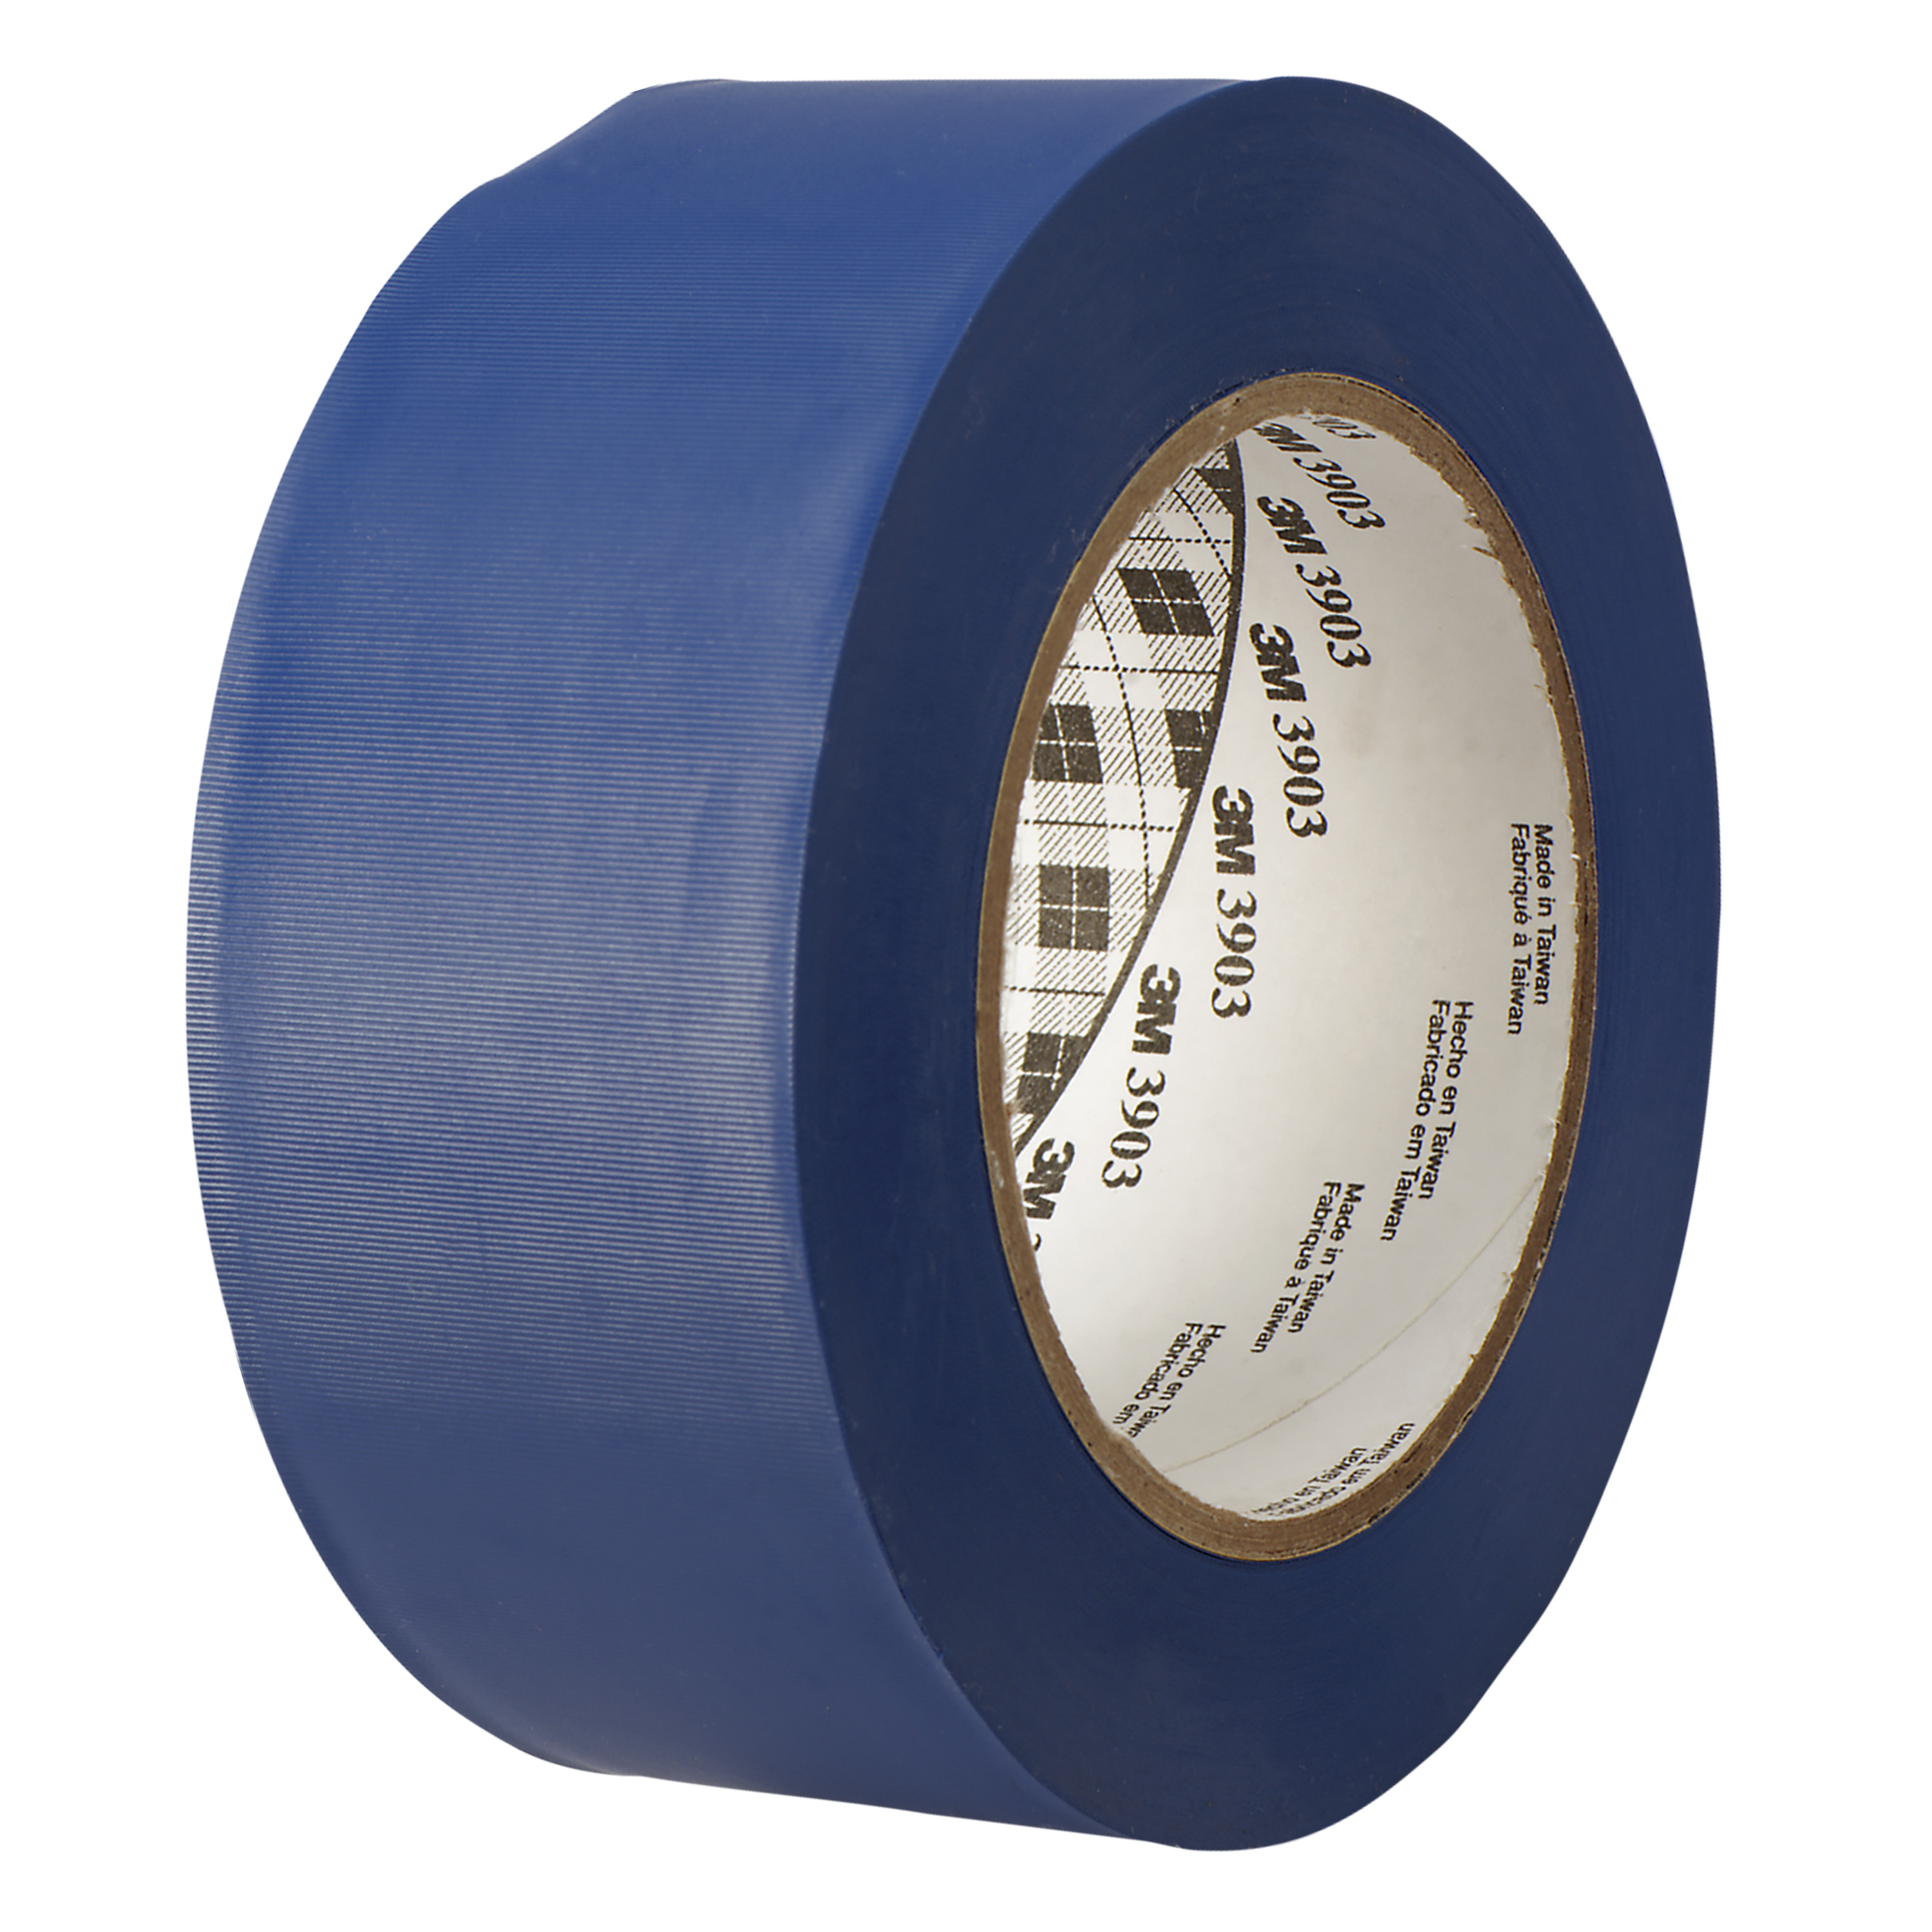 3M™ Vinyl Duct Tape 3903, Blue, 2 in x 50 yd, 6.5 mil, 24 per case,
Individually Wrapped Conveniently Packaged